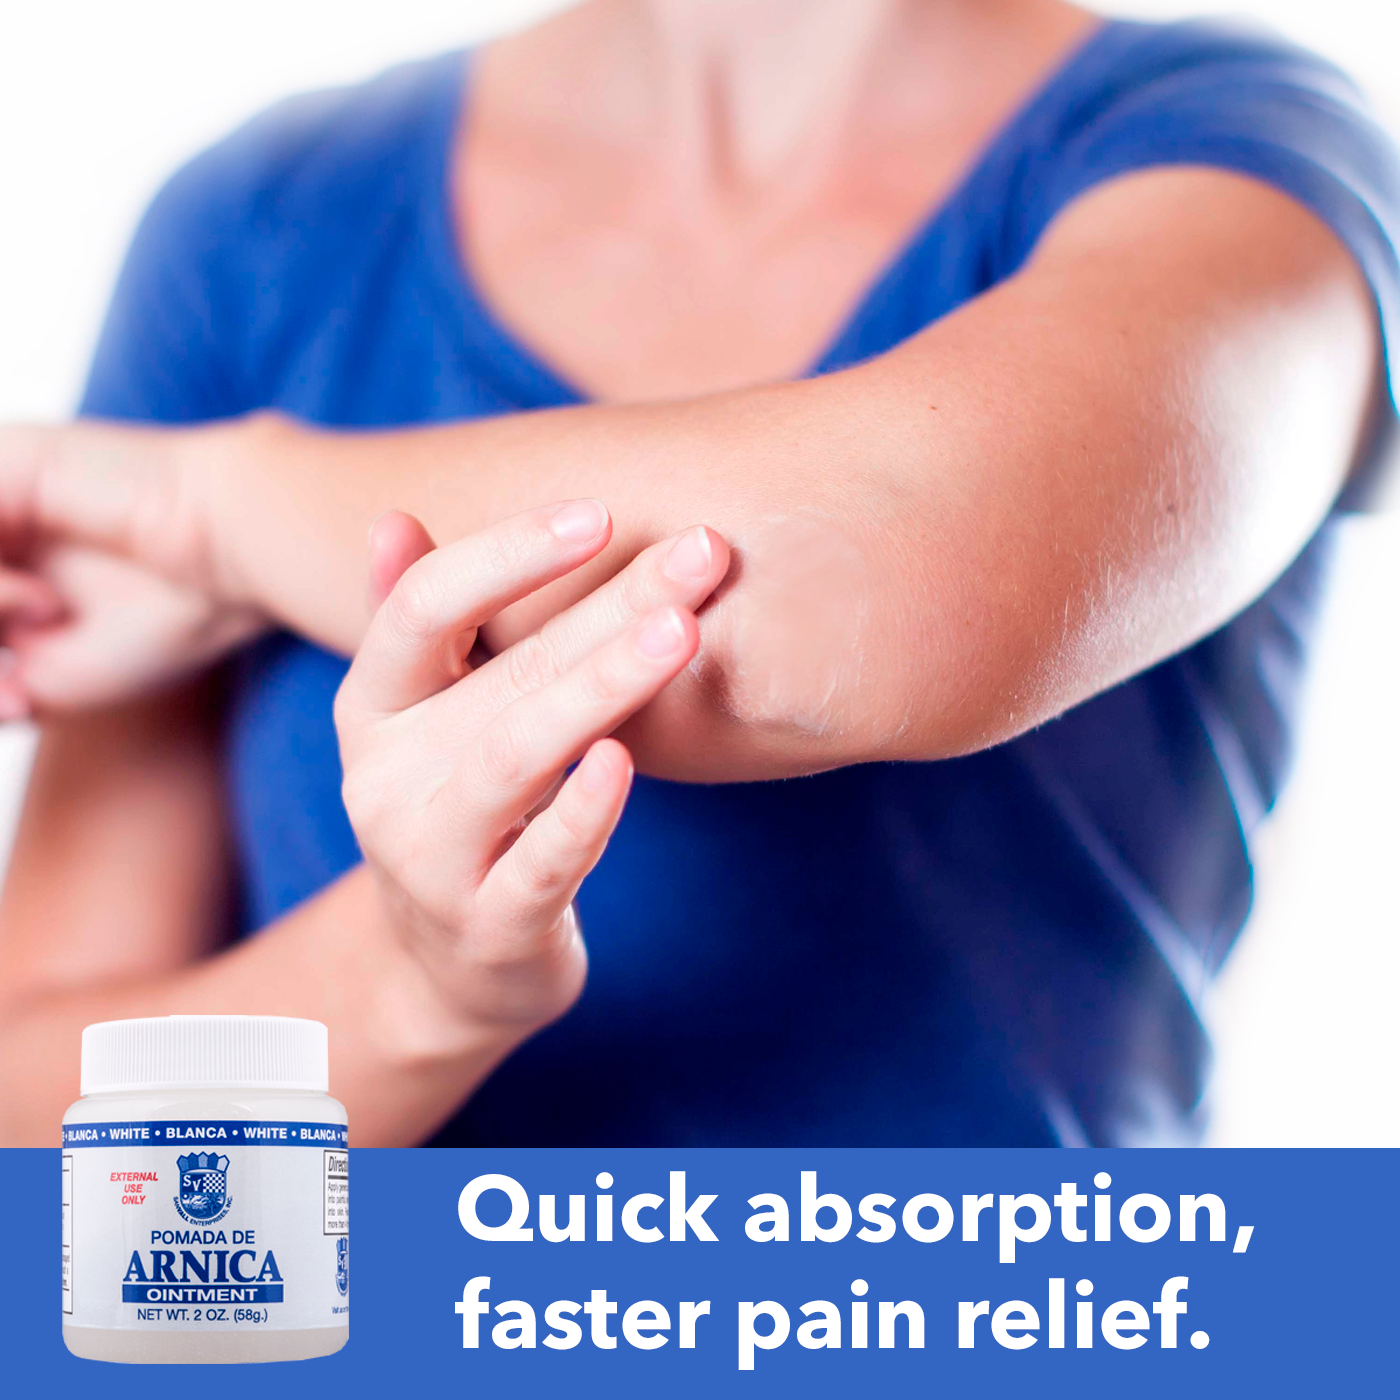 Quick absorption, faster pain relief